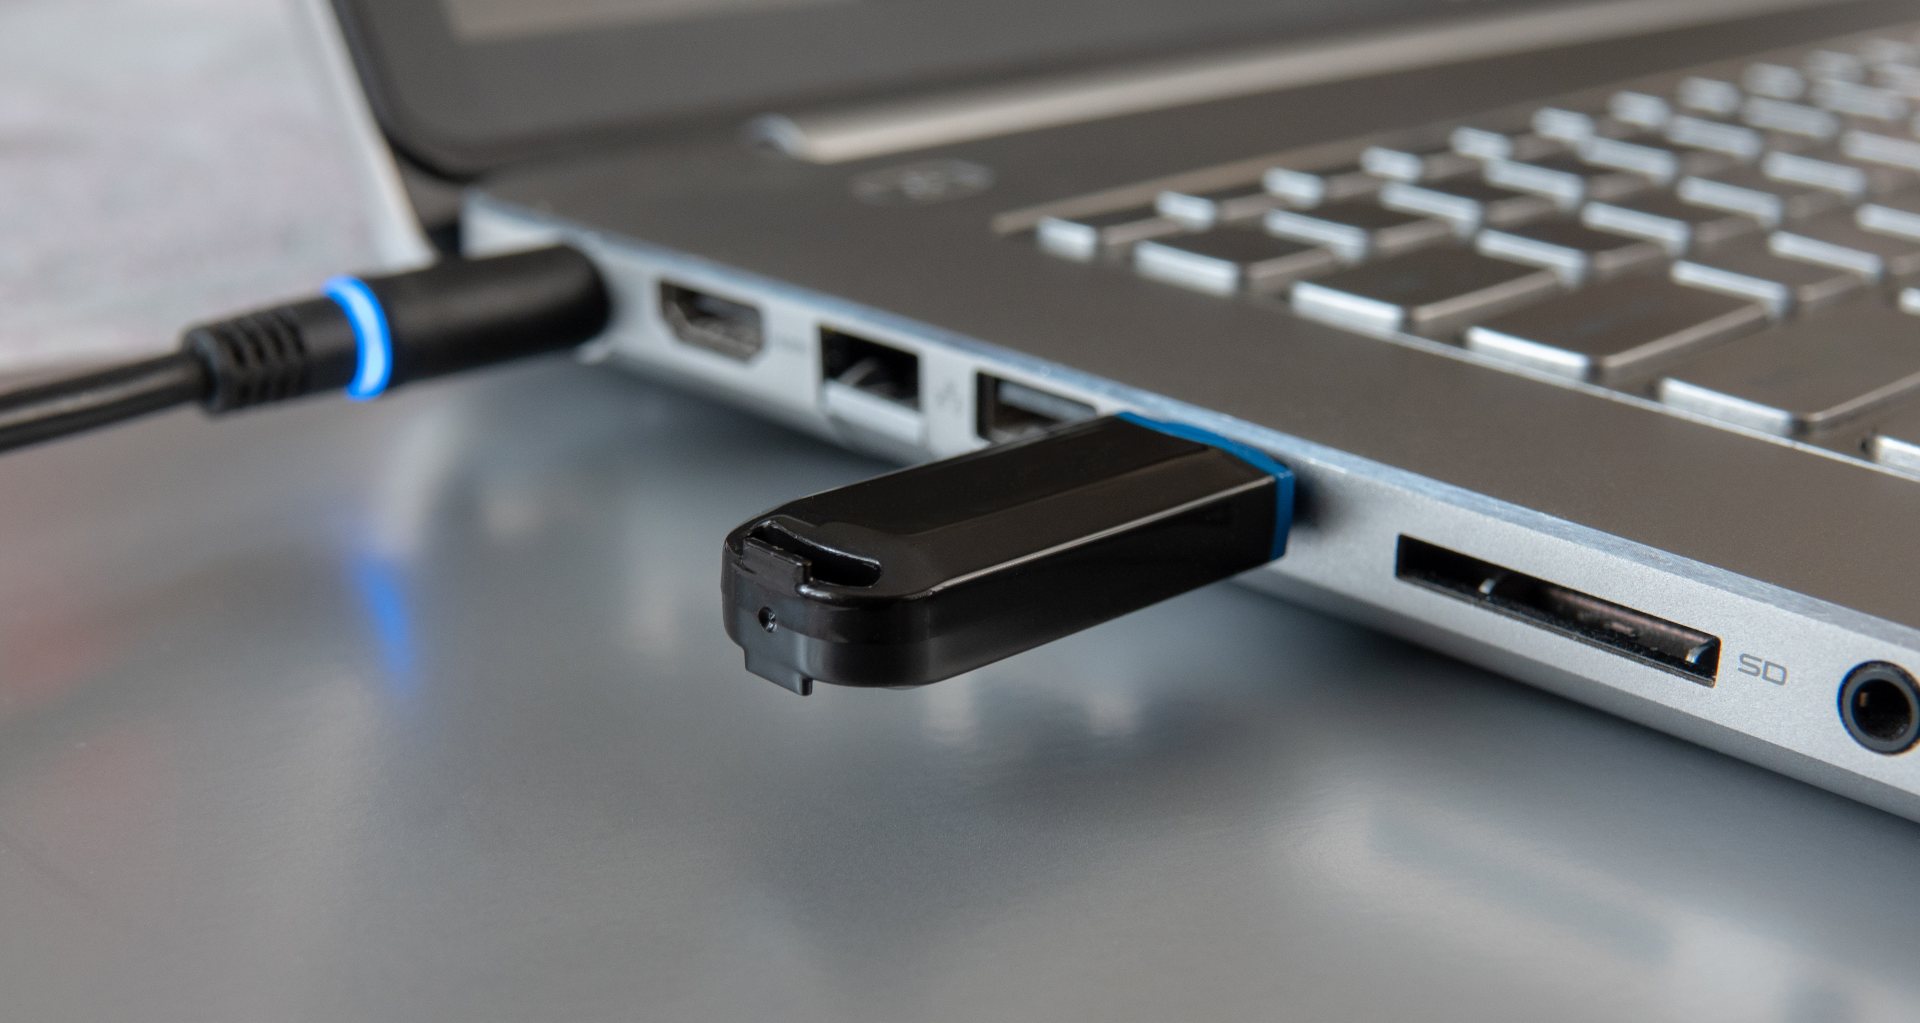 Write out Compare Practical SOLVED] How to Fix a Broken USB Stick and Recover Data